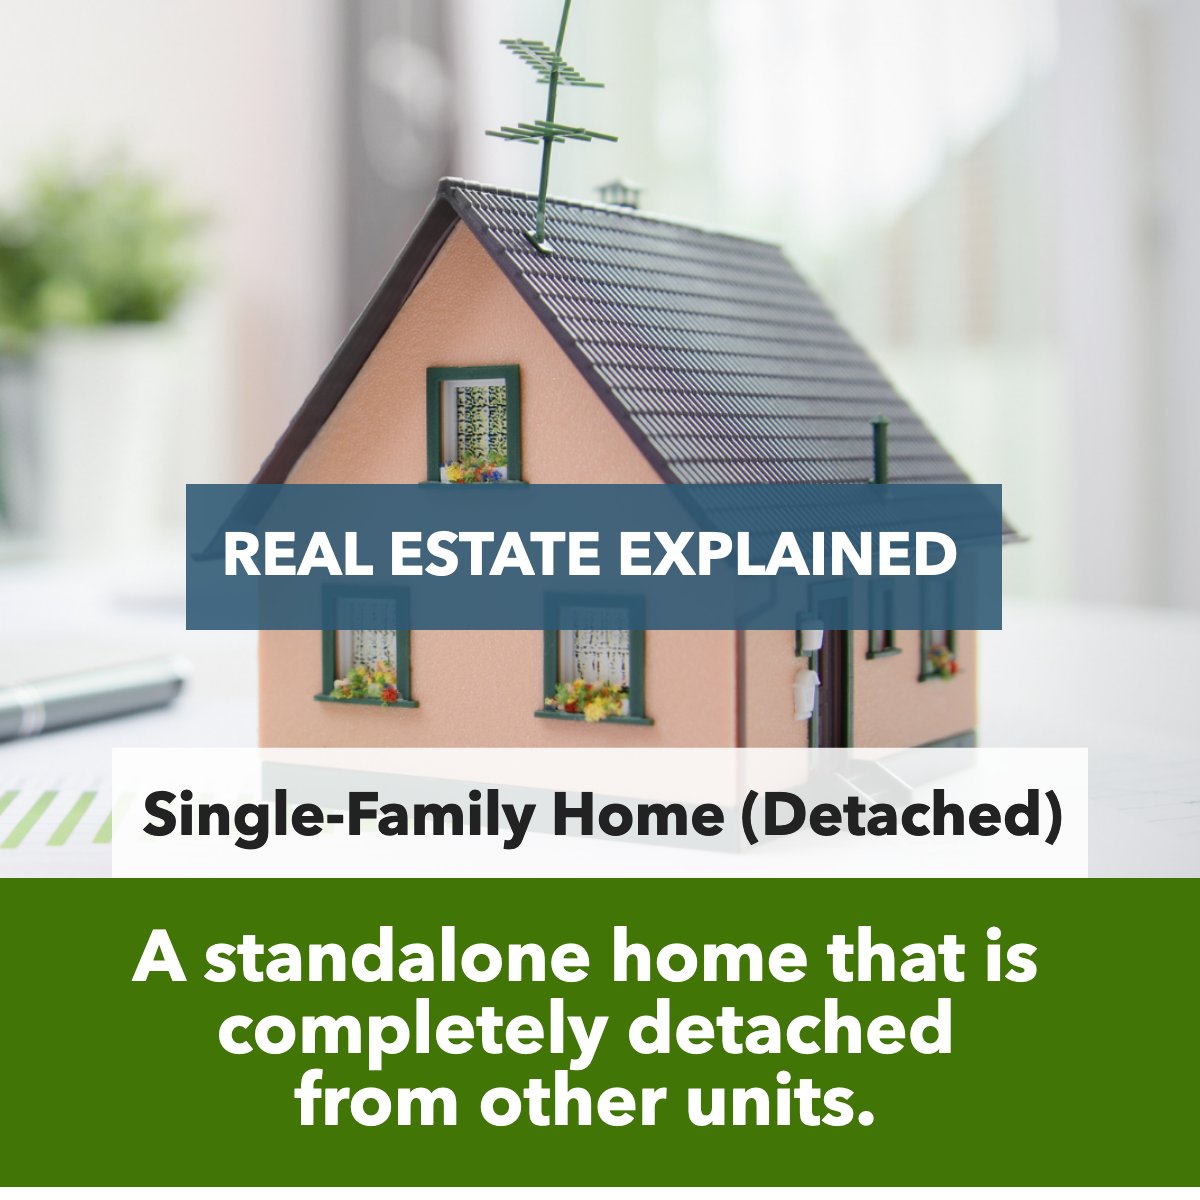 Real Estate Explained: Did you know the term 'Detached'? 🤓 Did you nail it? #detached #factsdaily #knowledgeispower #didyouknow #realestate